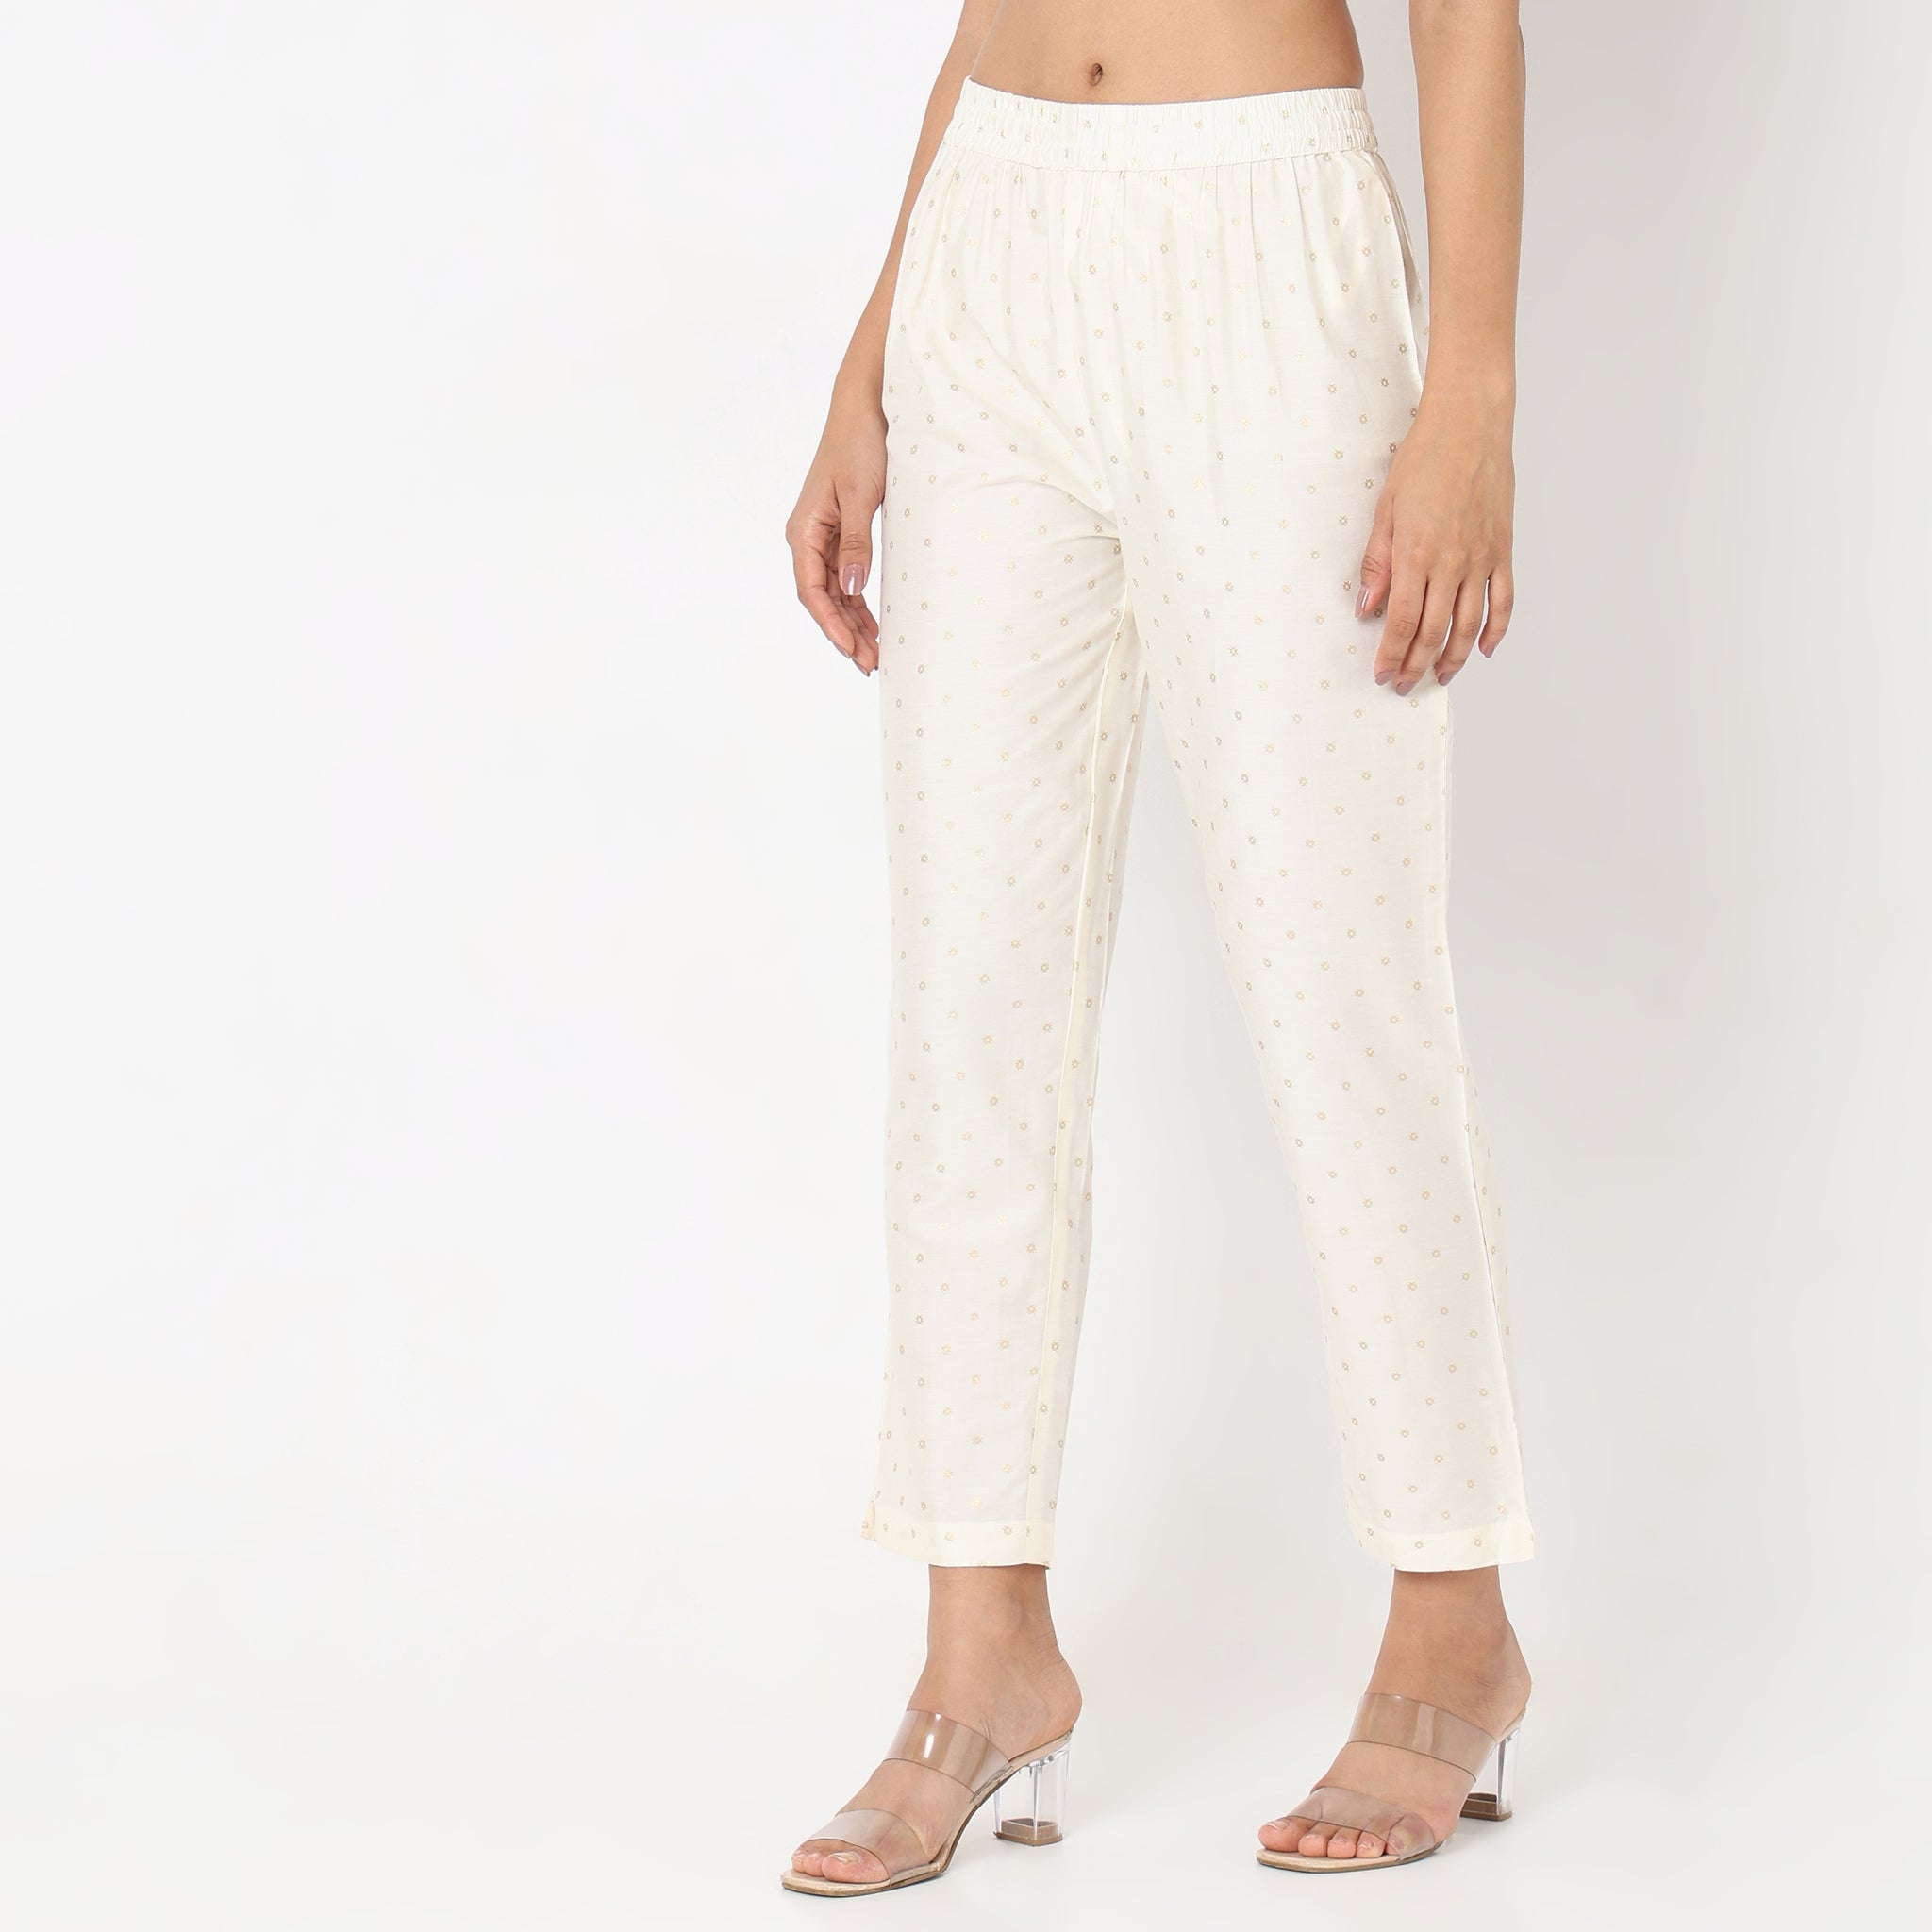 White High Waist Trousers - Buy White High Waist Trousers online in India